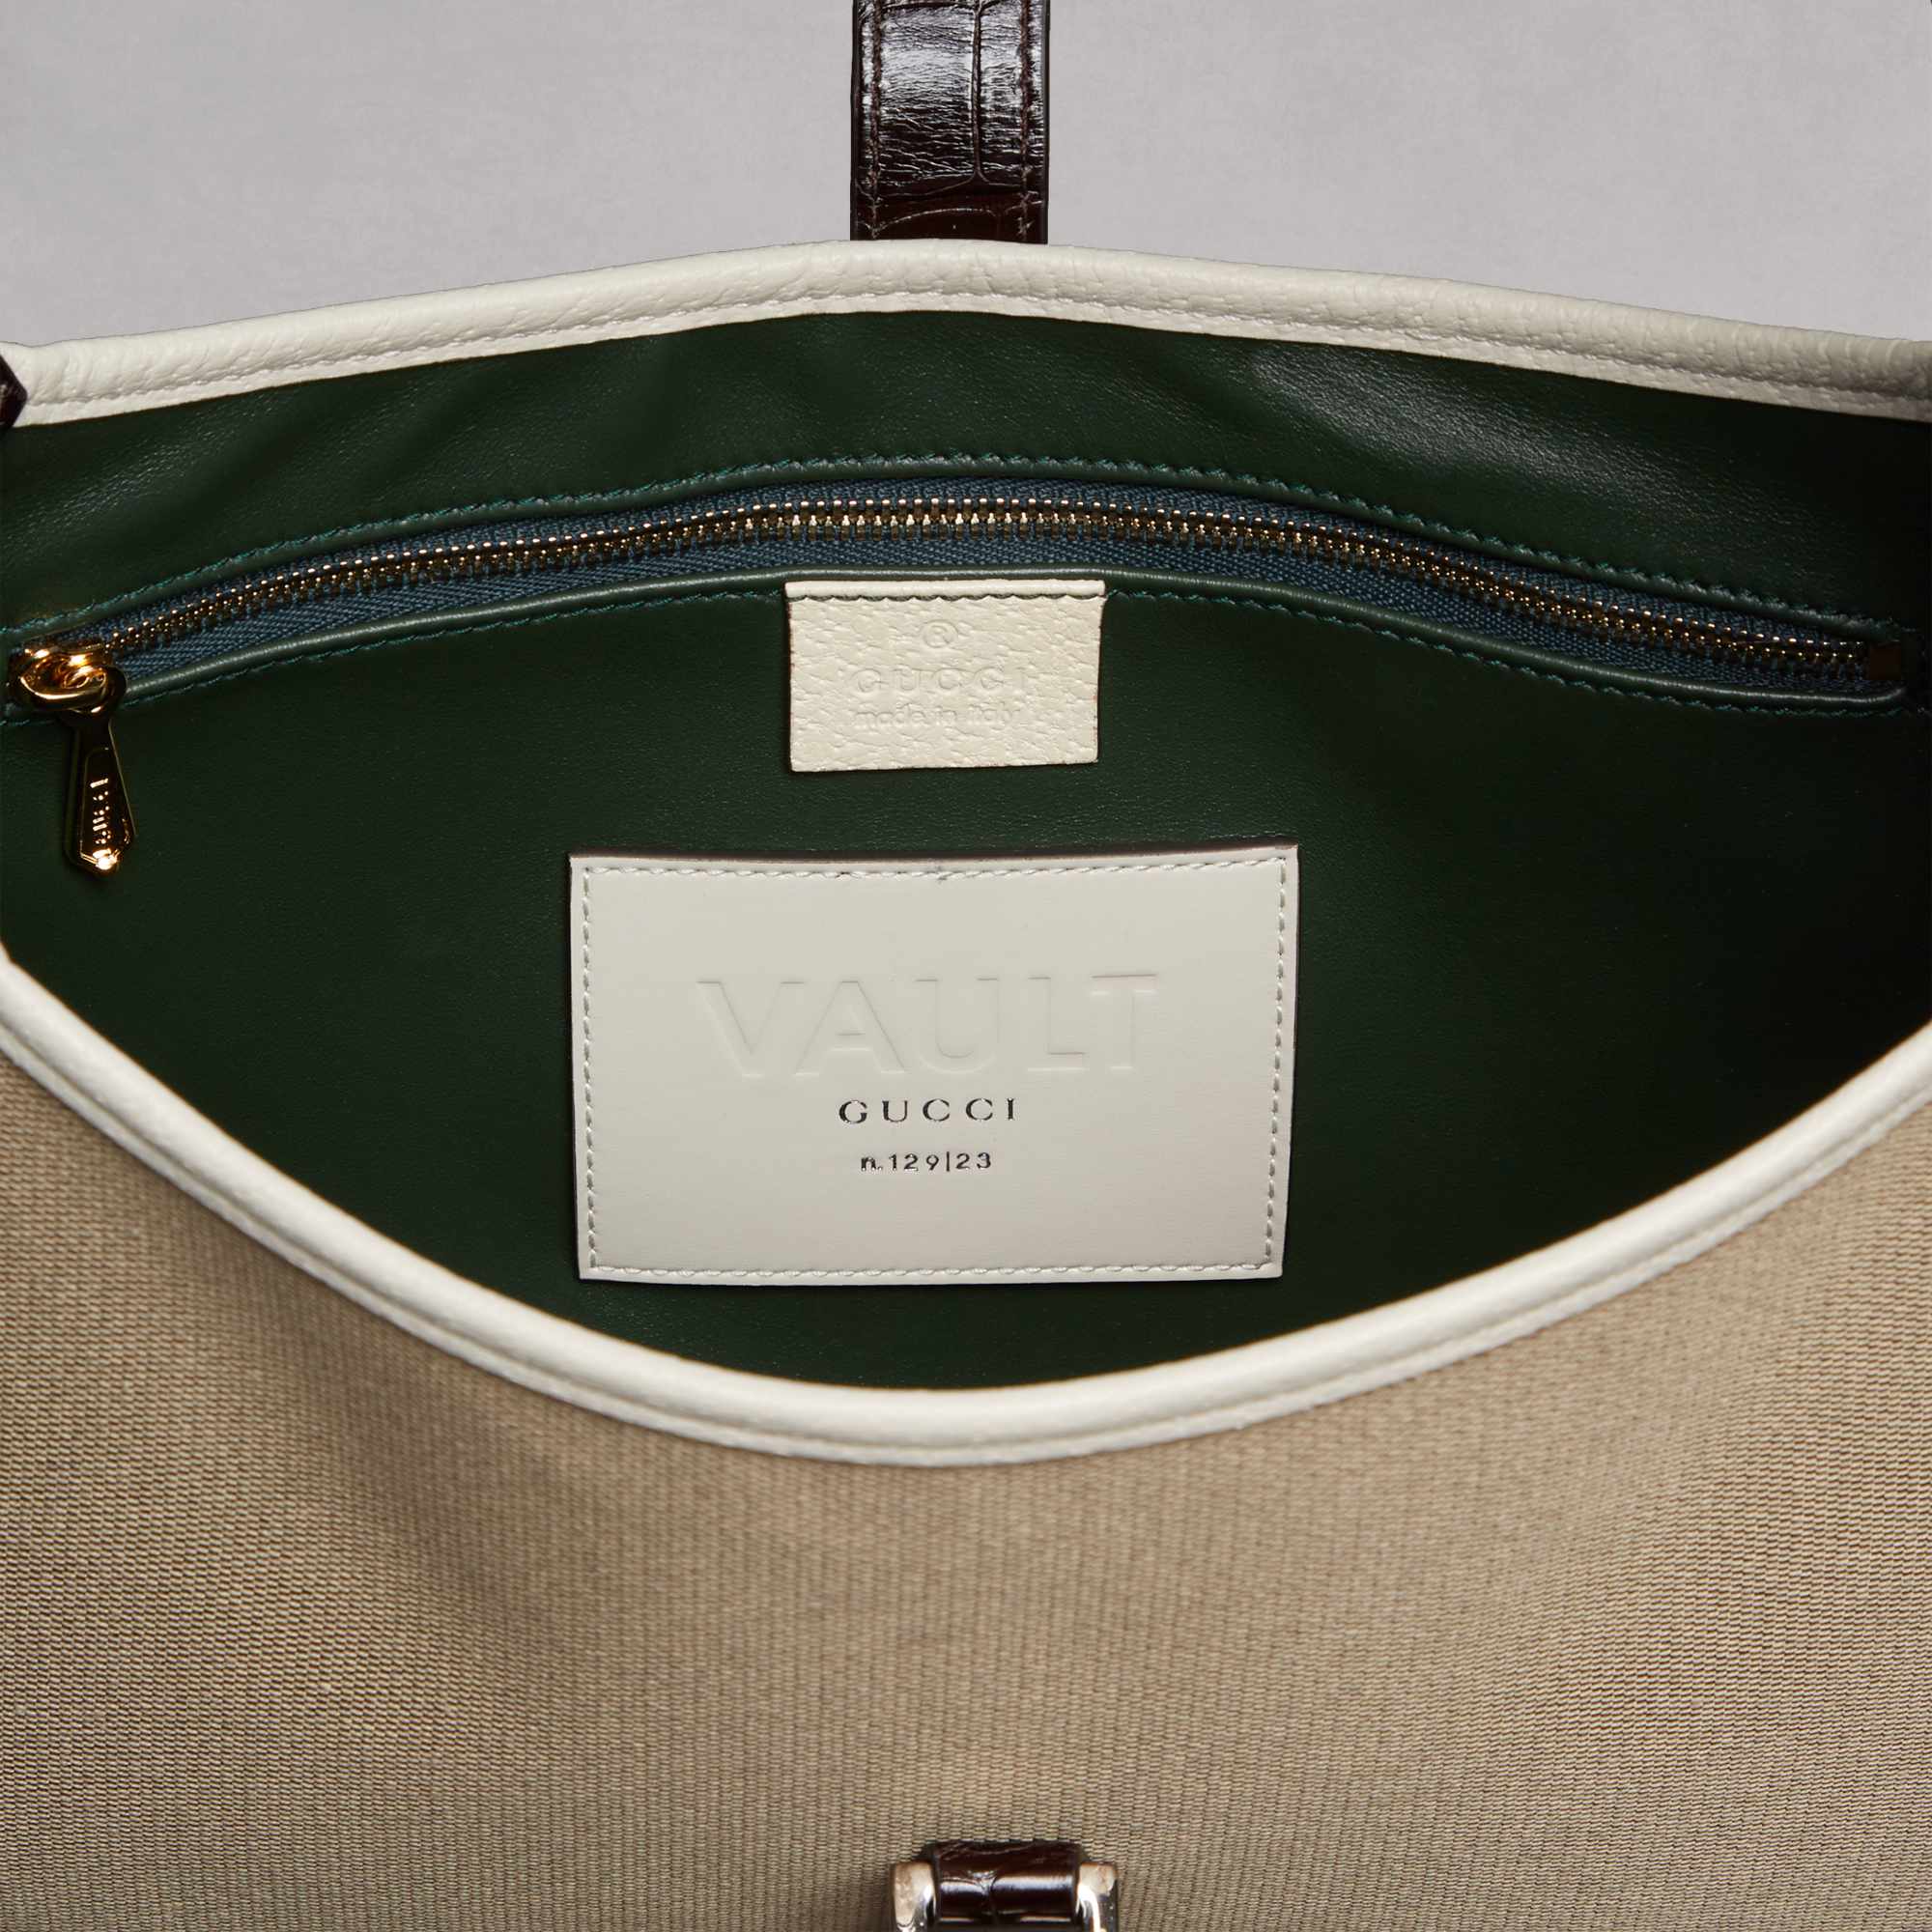 Vintage Gucci bags & trunks for sale at auction